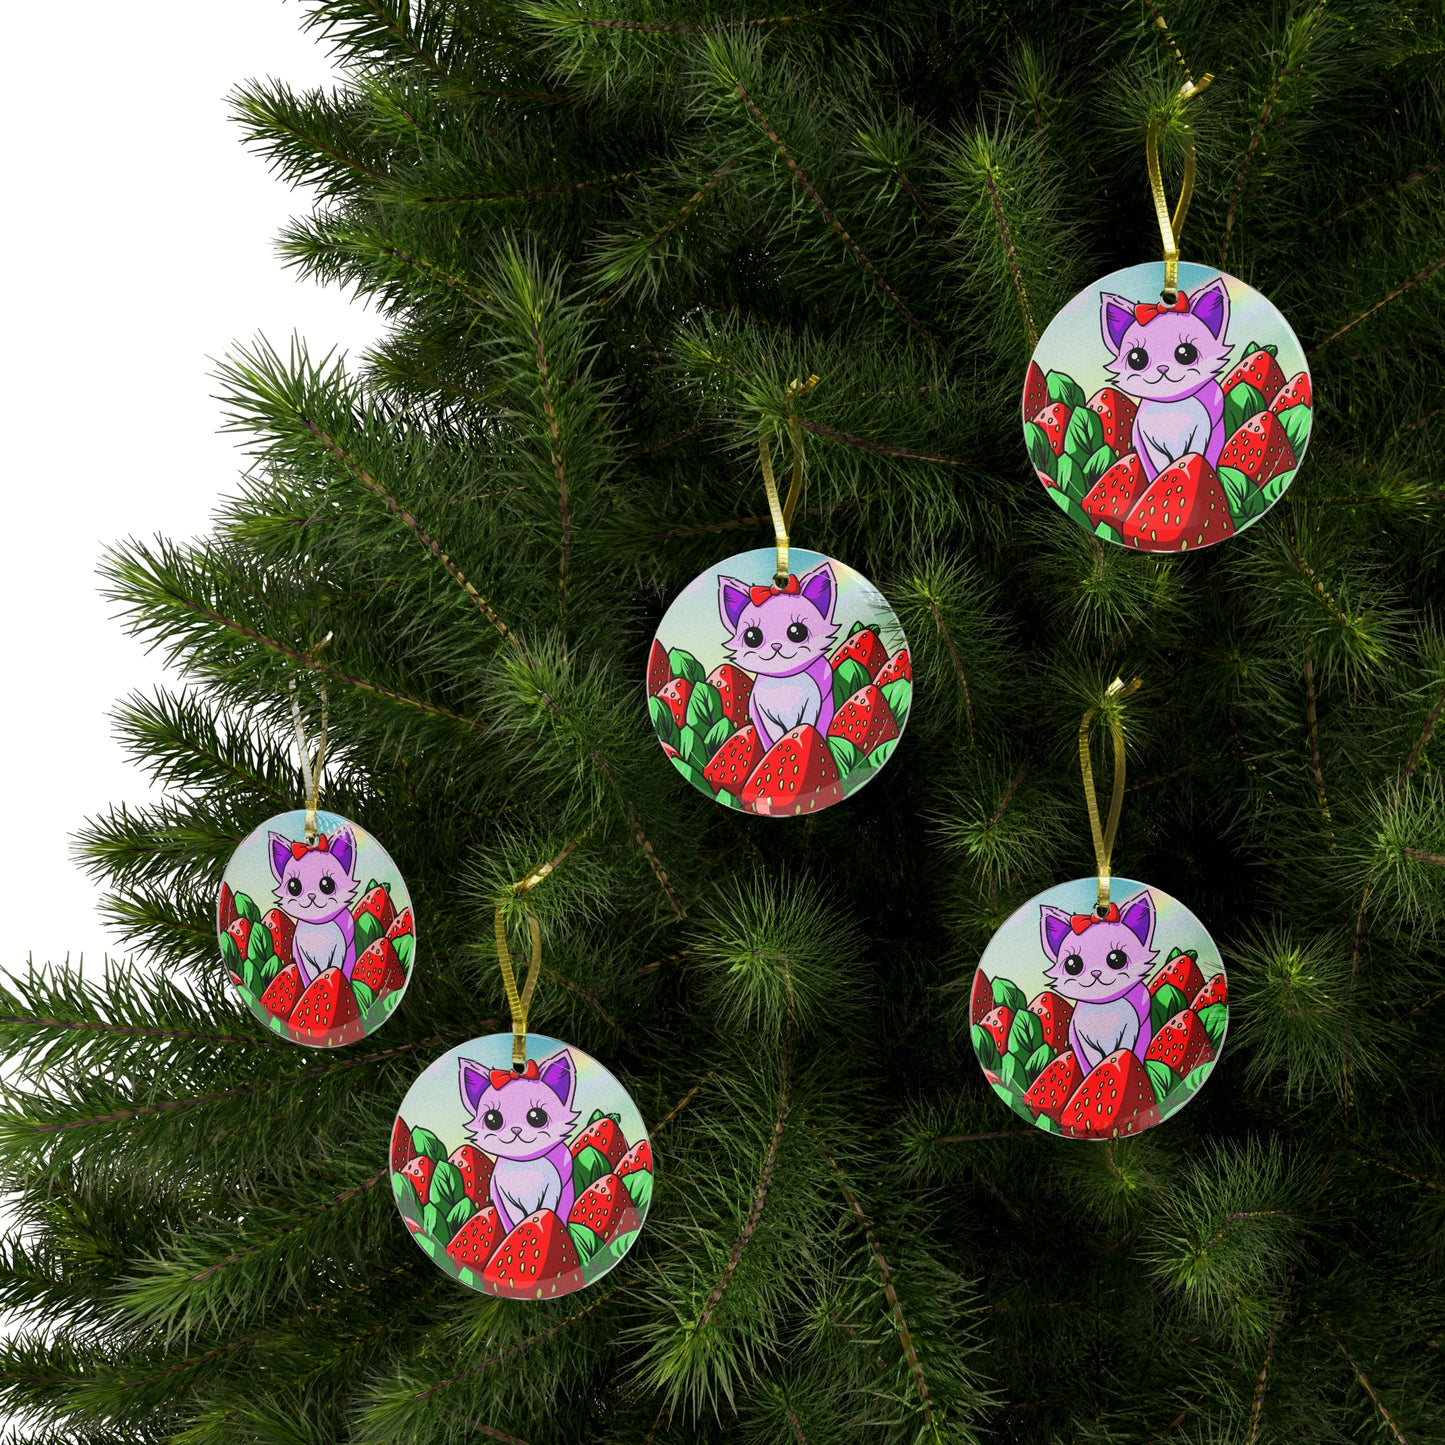 Kitty in a Strawberry Field Glass Ornaments